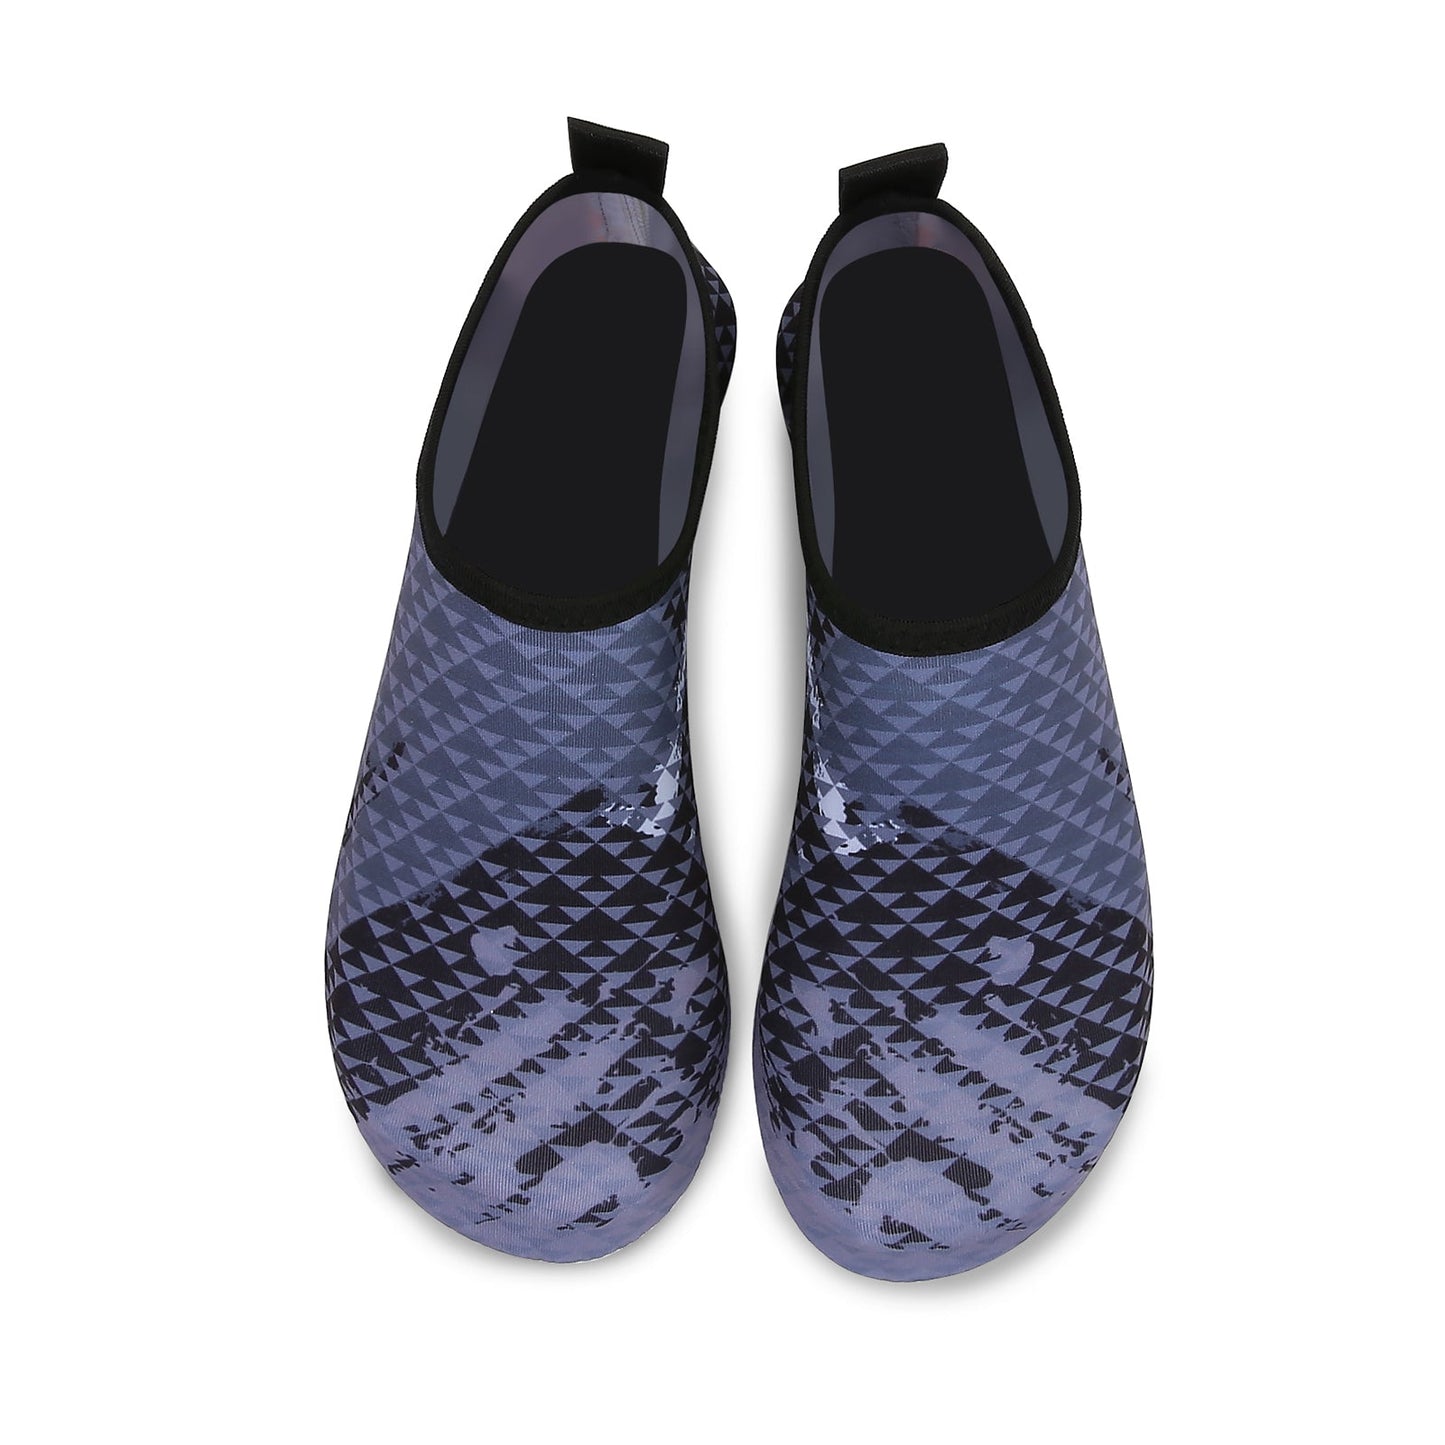 Men and Women a Slip On Barefoot Quick-Dry Beach Aqua Yoga Water Shoes (Triangle/Grey)